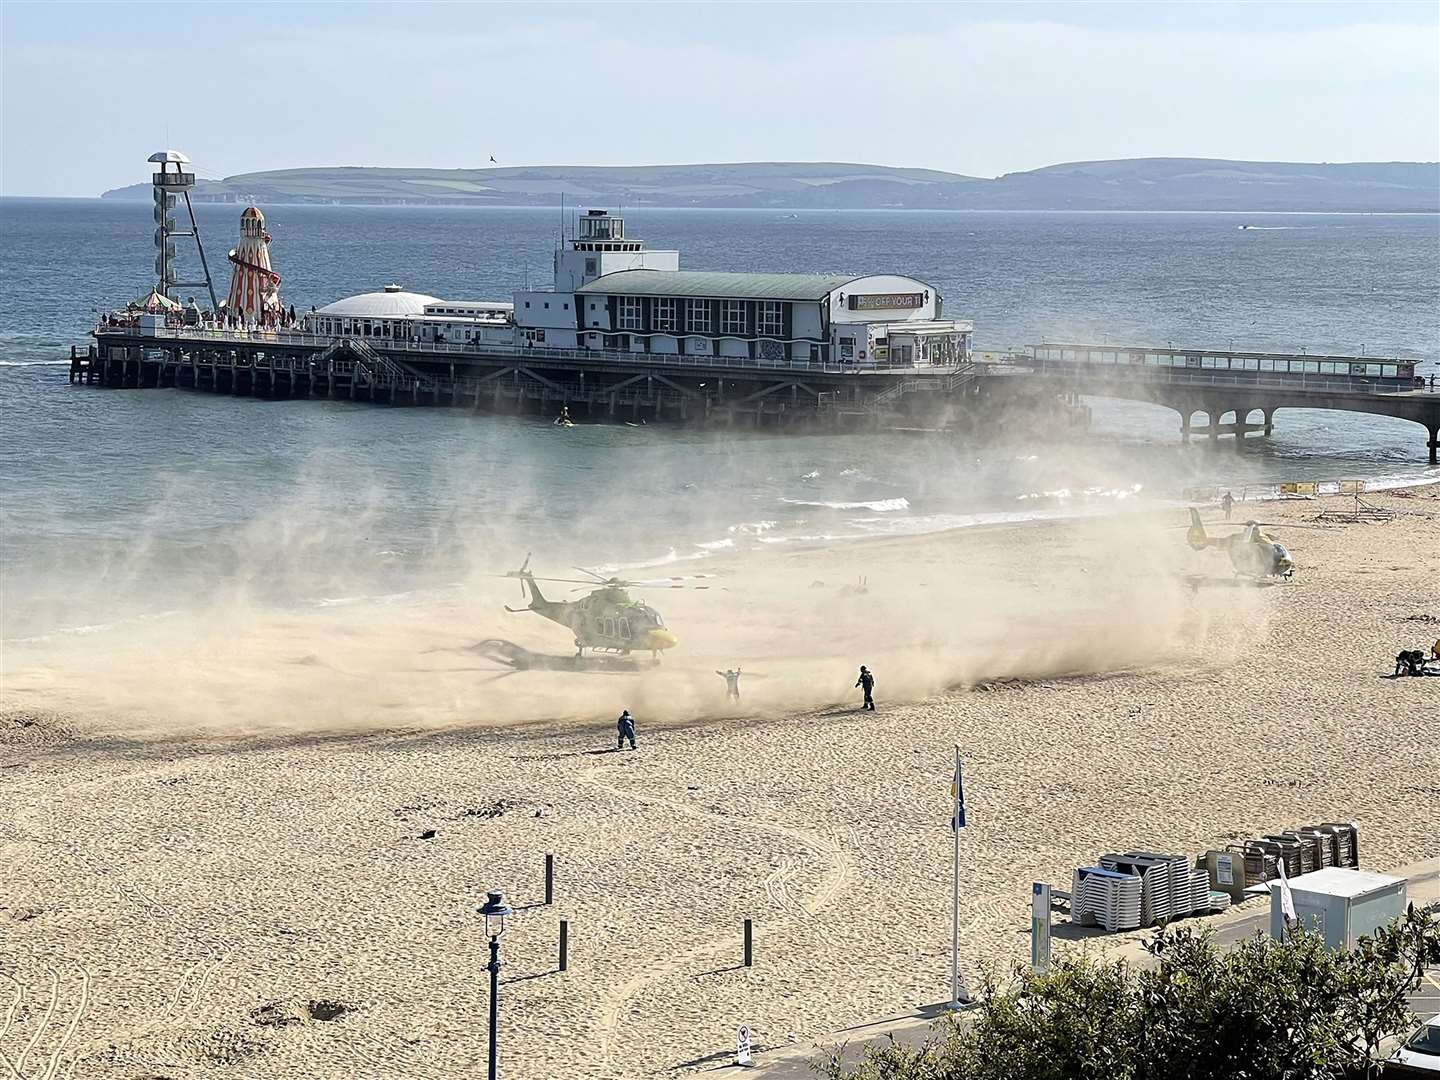 Helicopters on Bournemouth beach after the incident on Wednesday (Professor Dimitrios Buhalis/Twitter/PA)